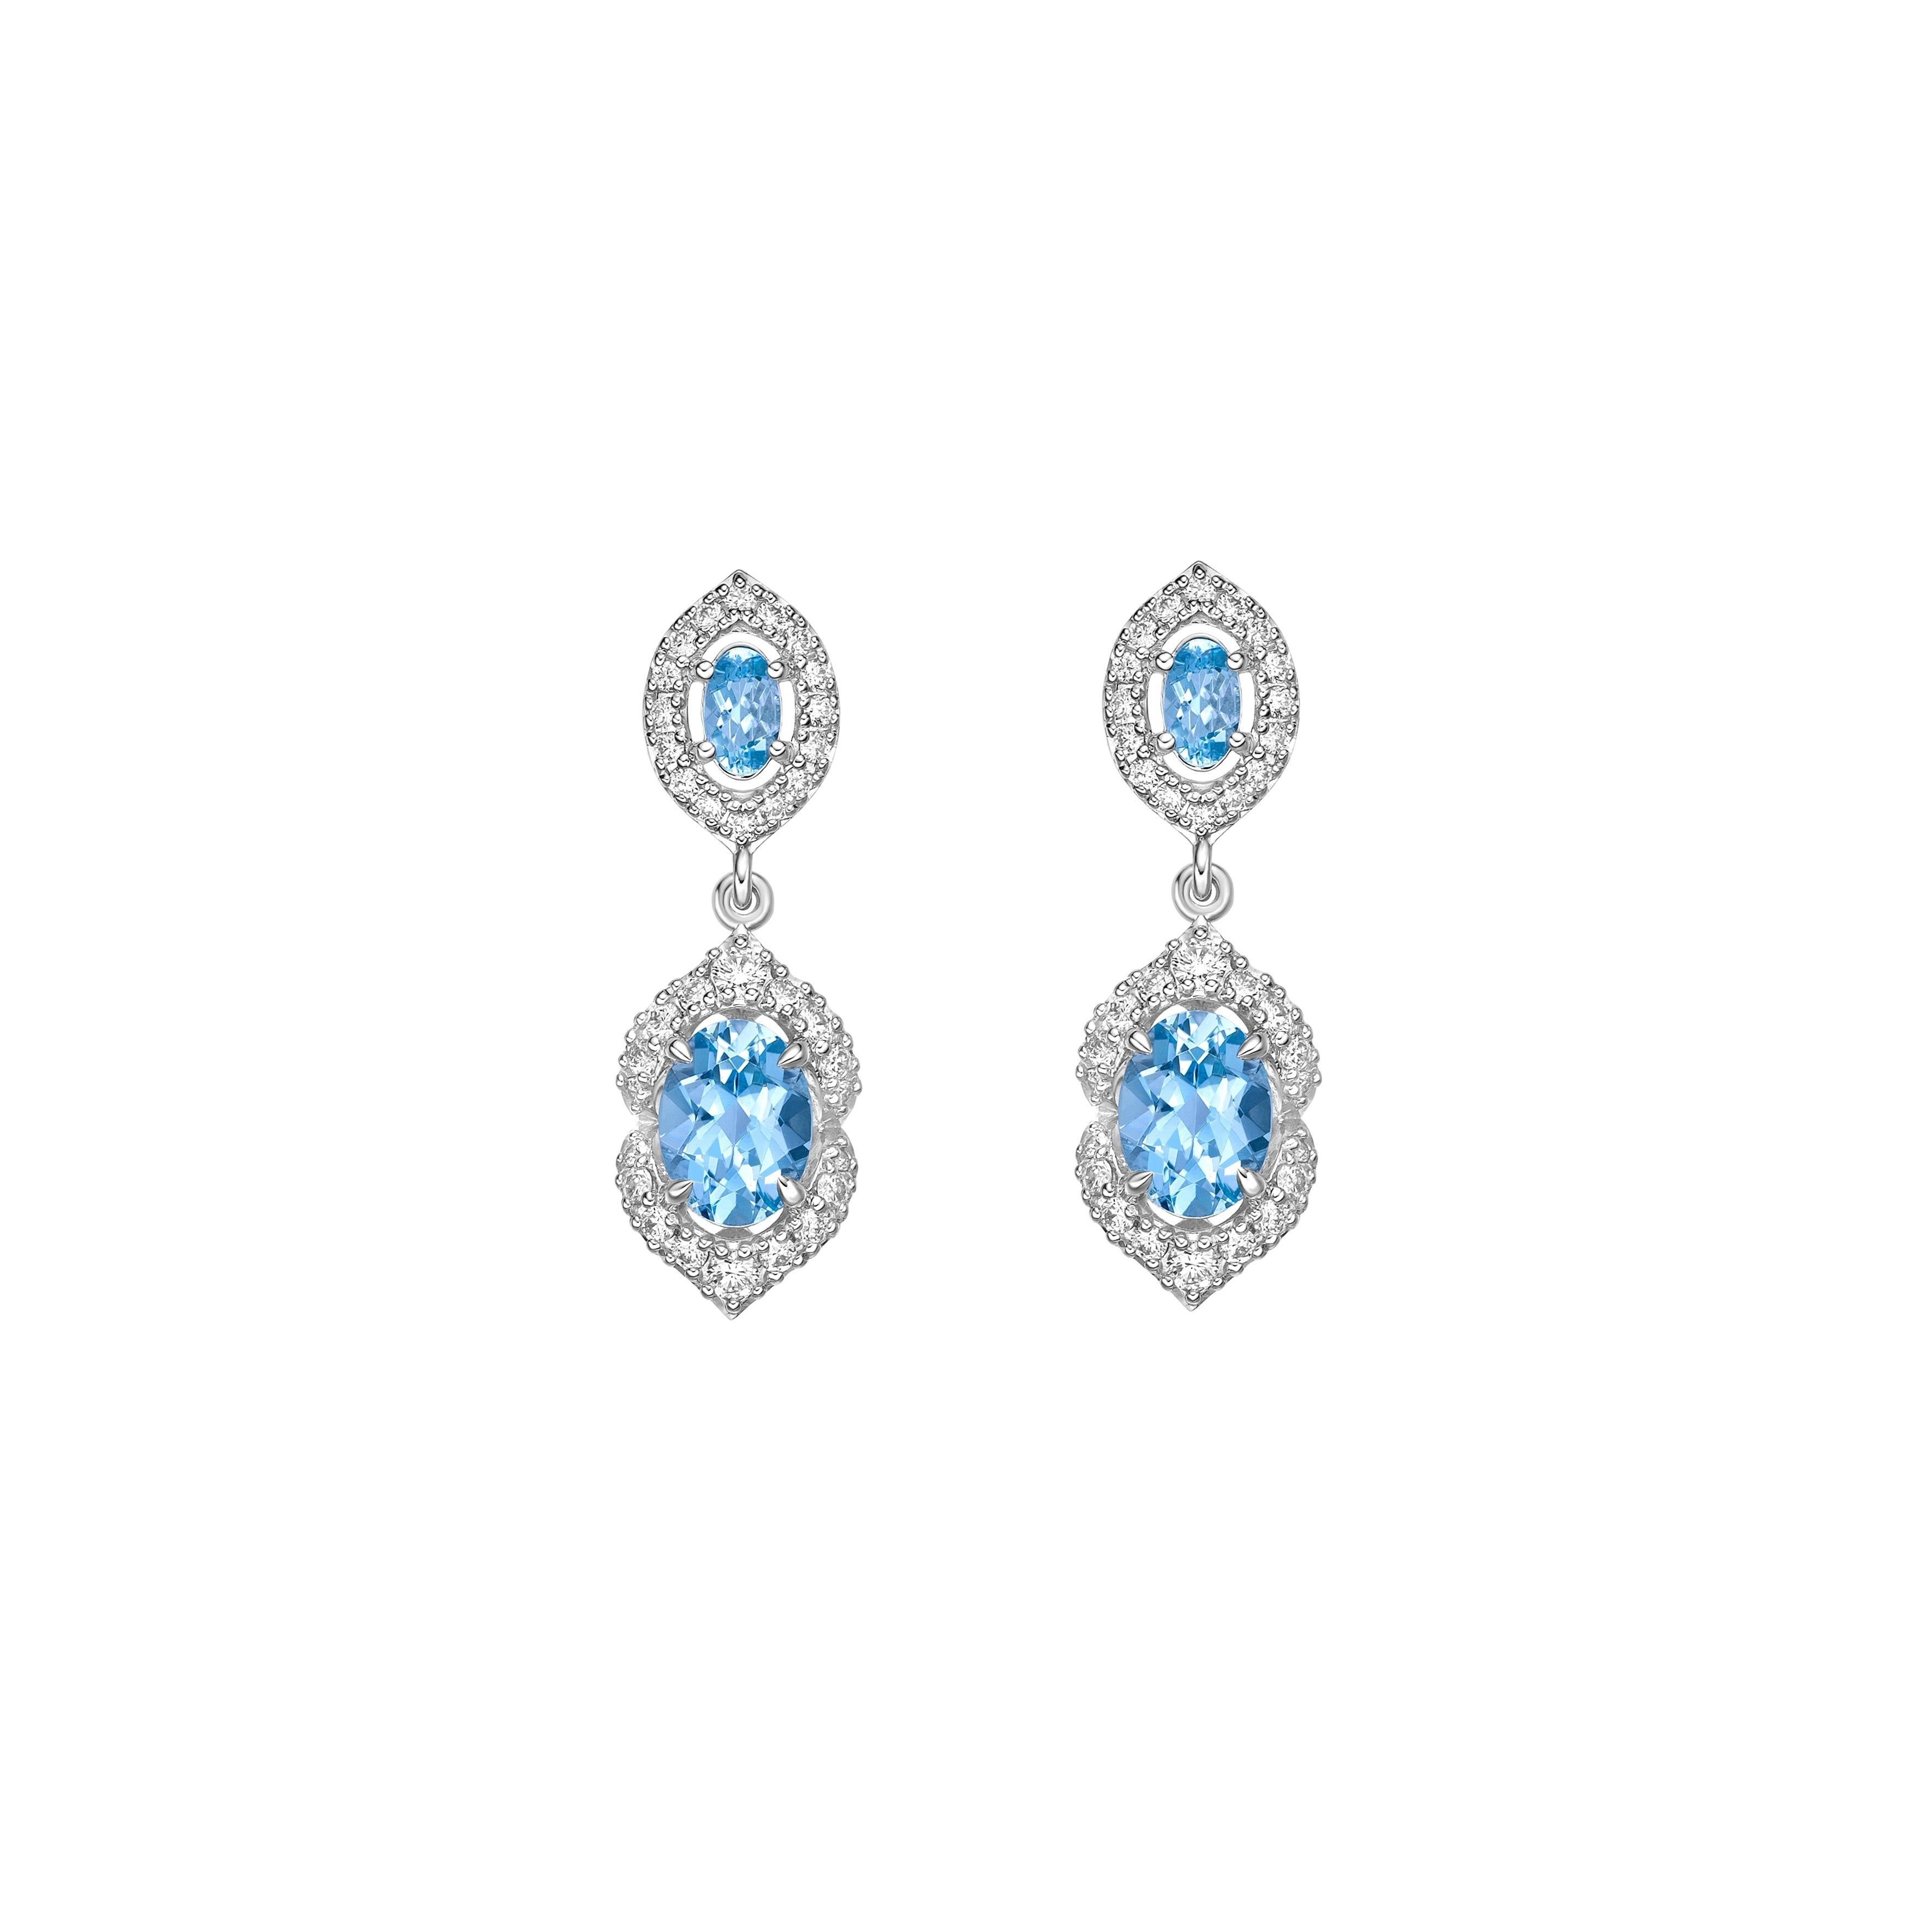 Contemporary 2.29 Carat Aquamarine Drop Earrings in 18Karat White Gold with White Diamond. For Sale